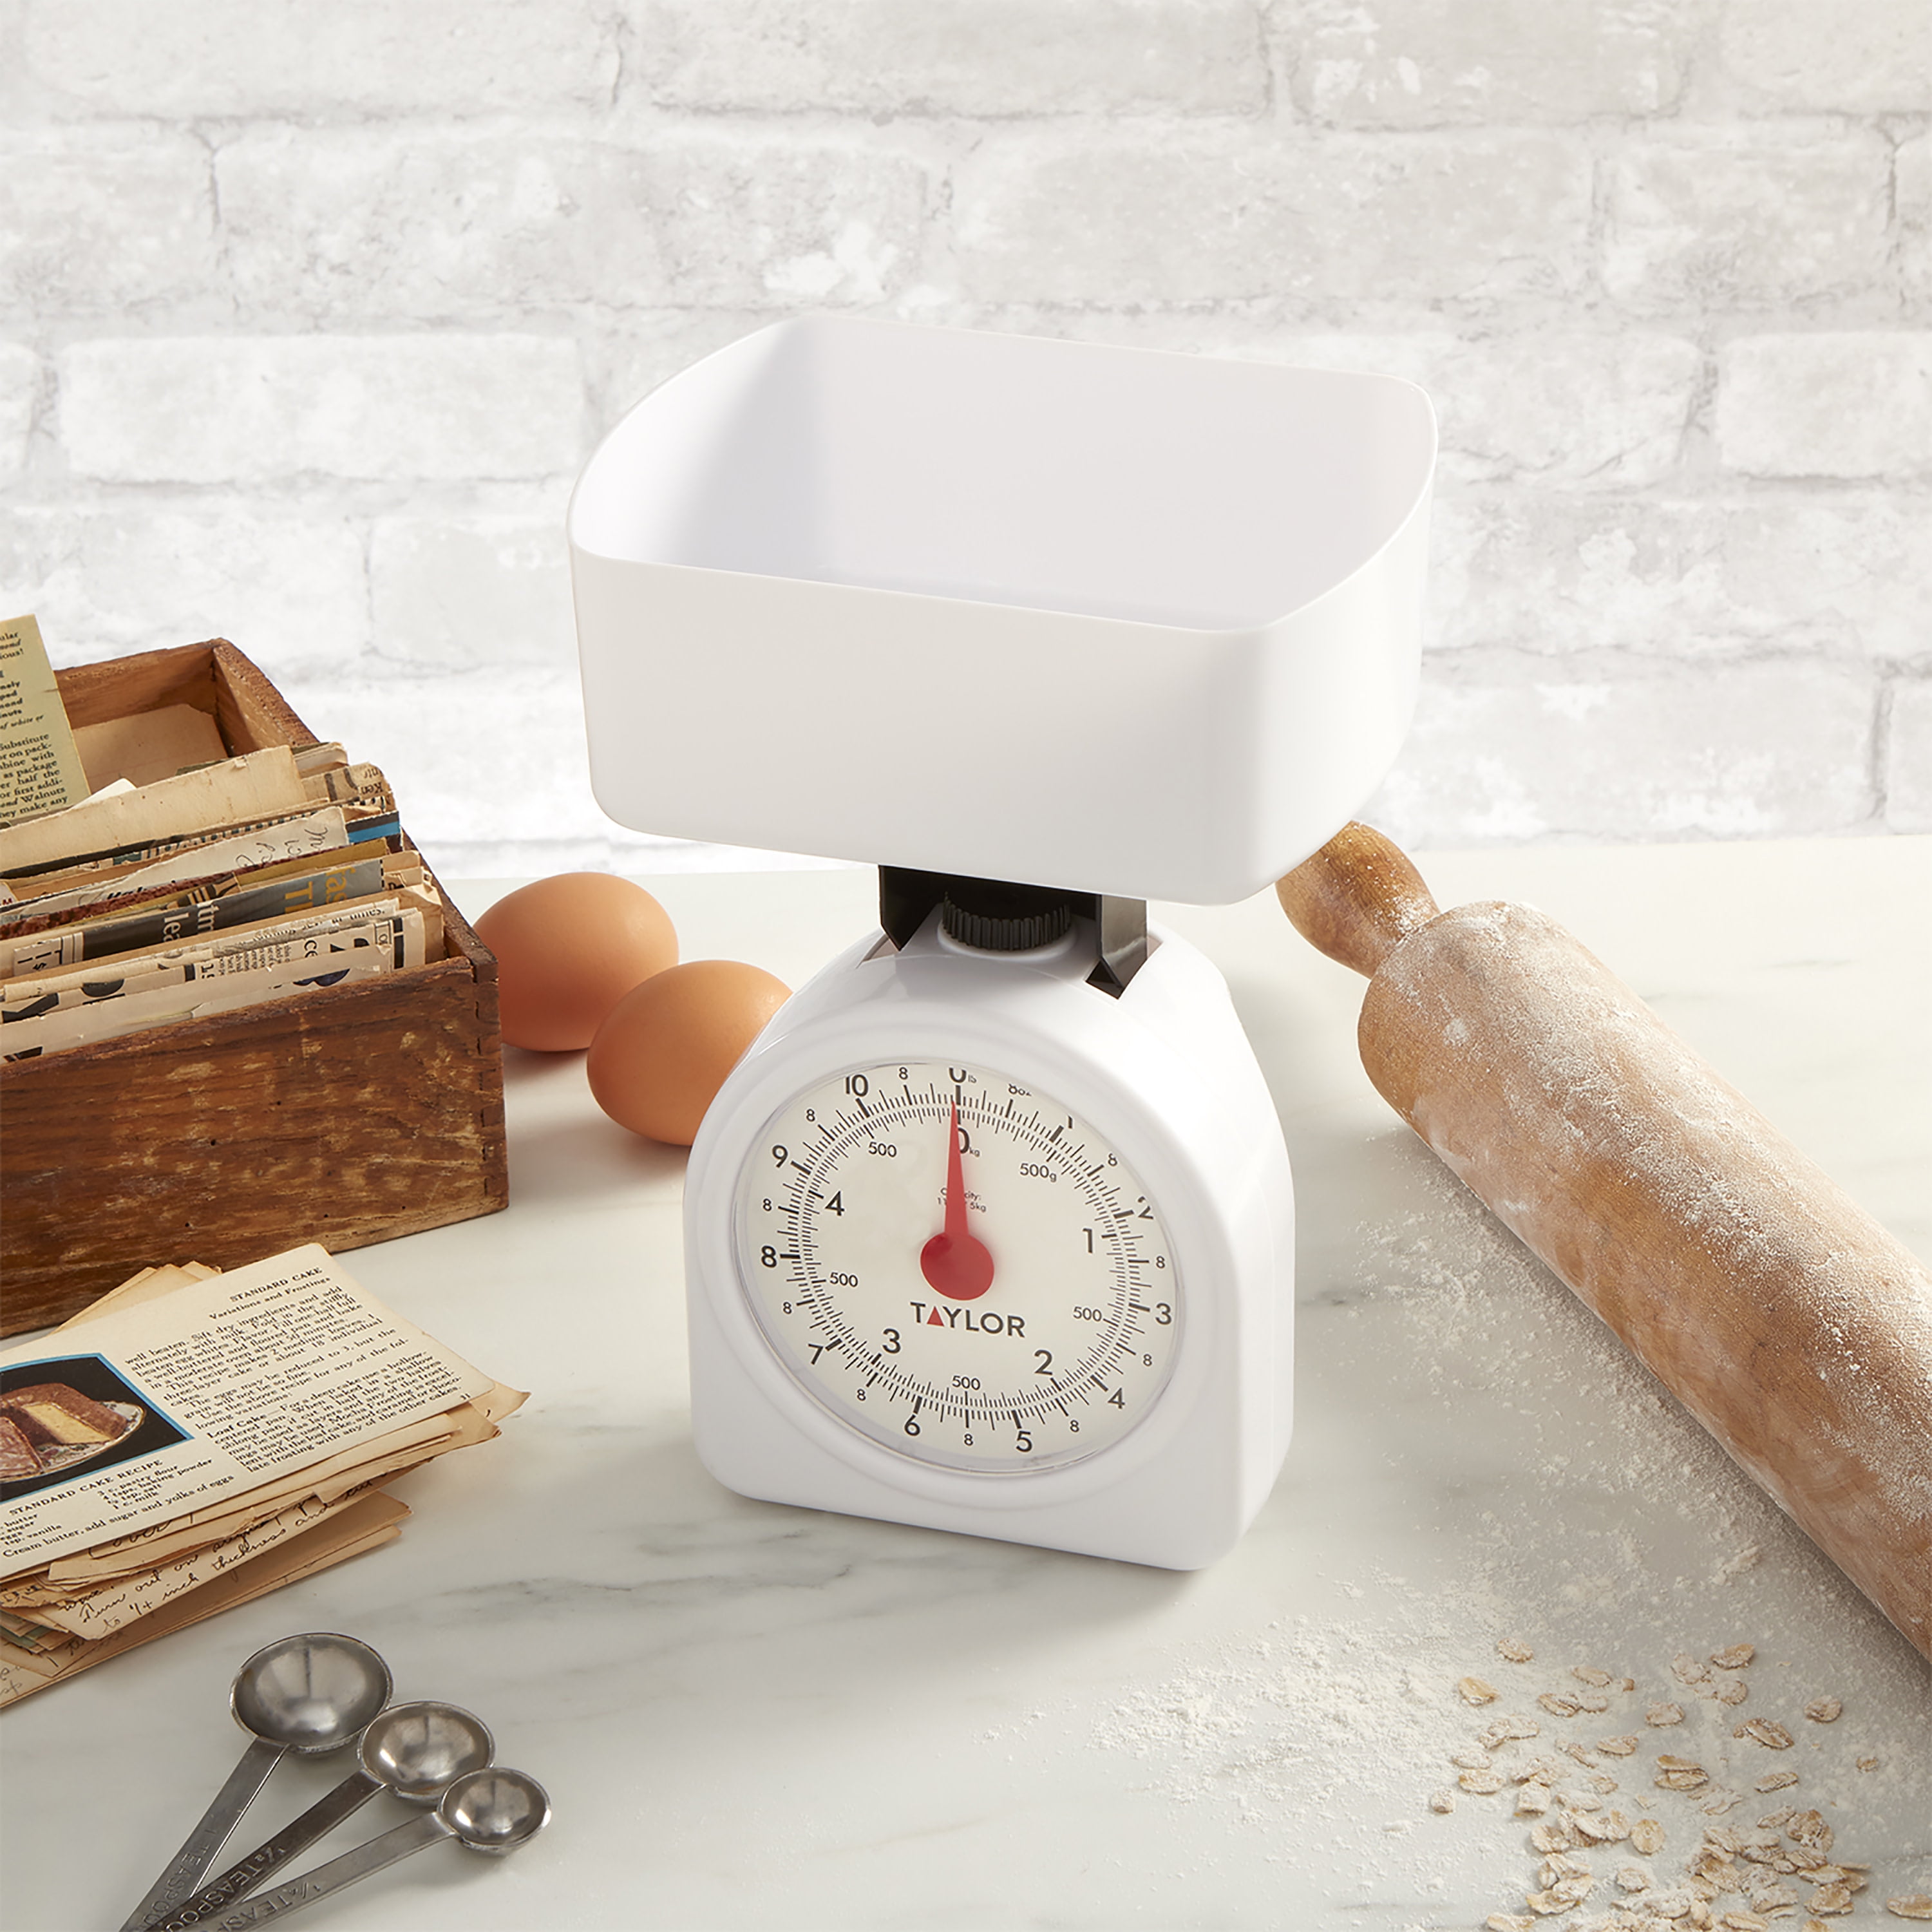 Taylor Mechanical/Analog Kitchen Scale and Food Scale in White